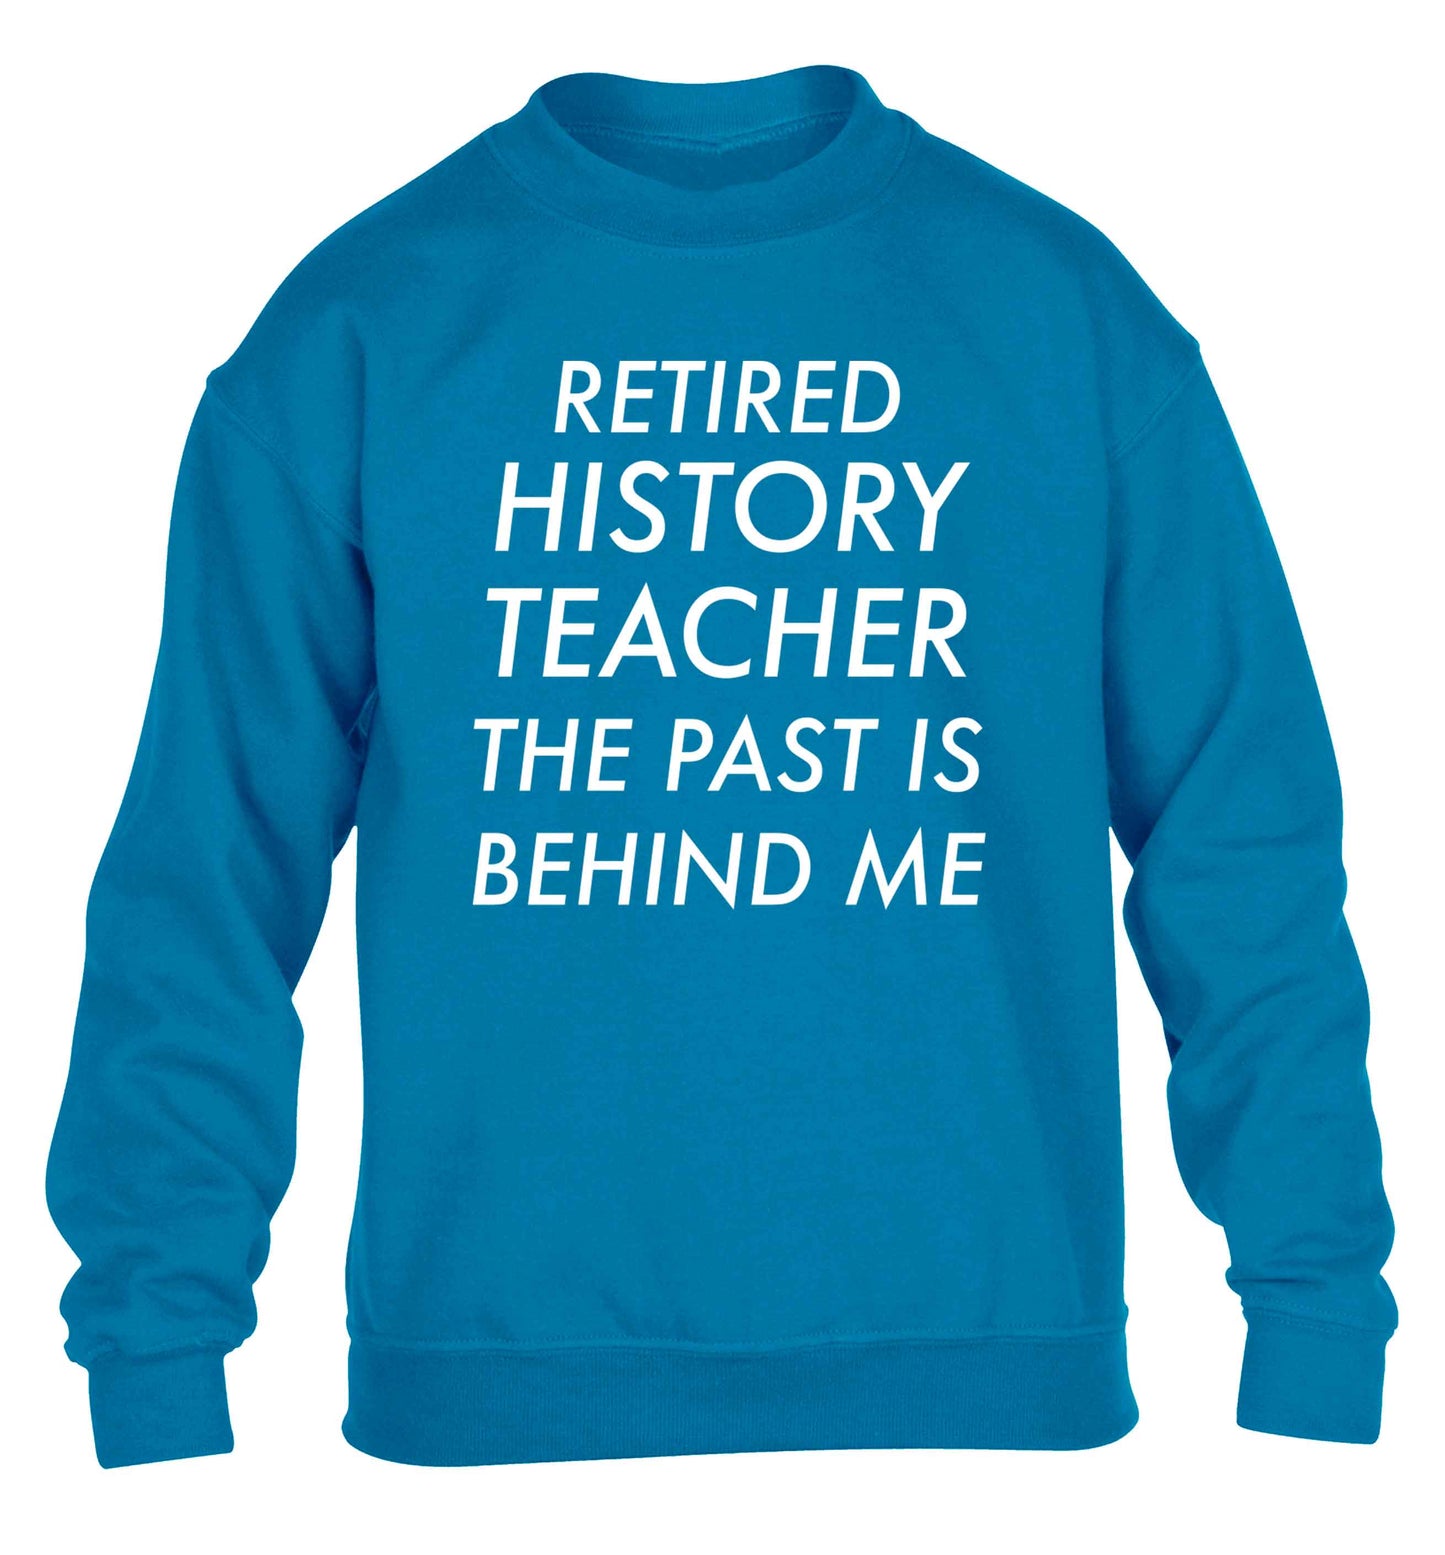 Retired history teacher the past is behind me children's blue sweater 12-13 Years